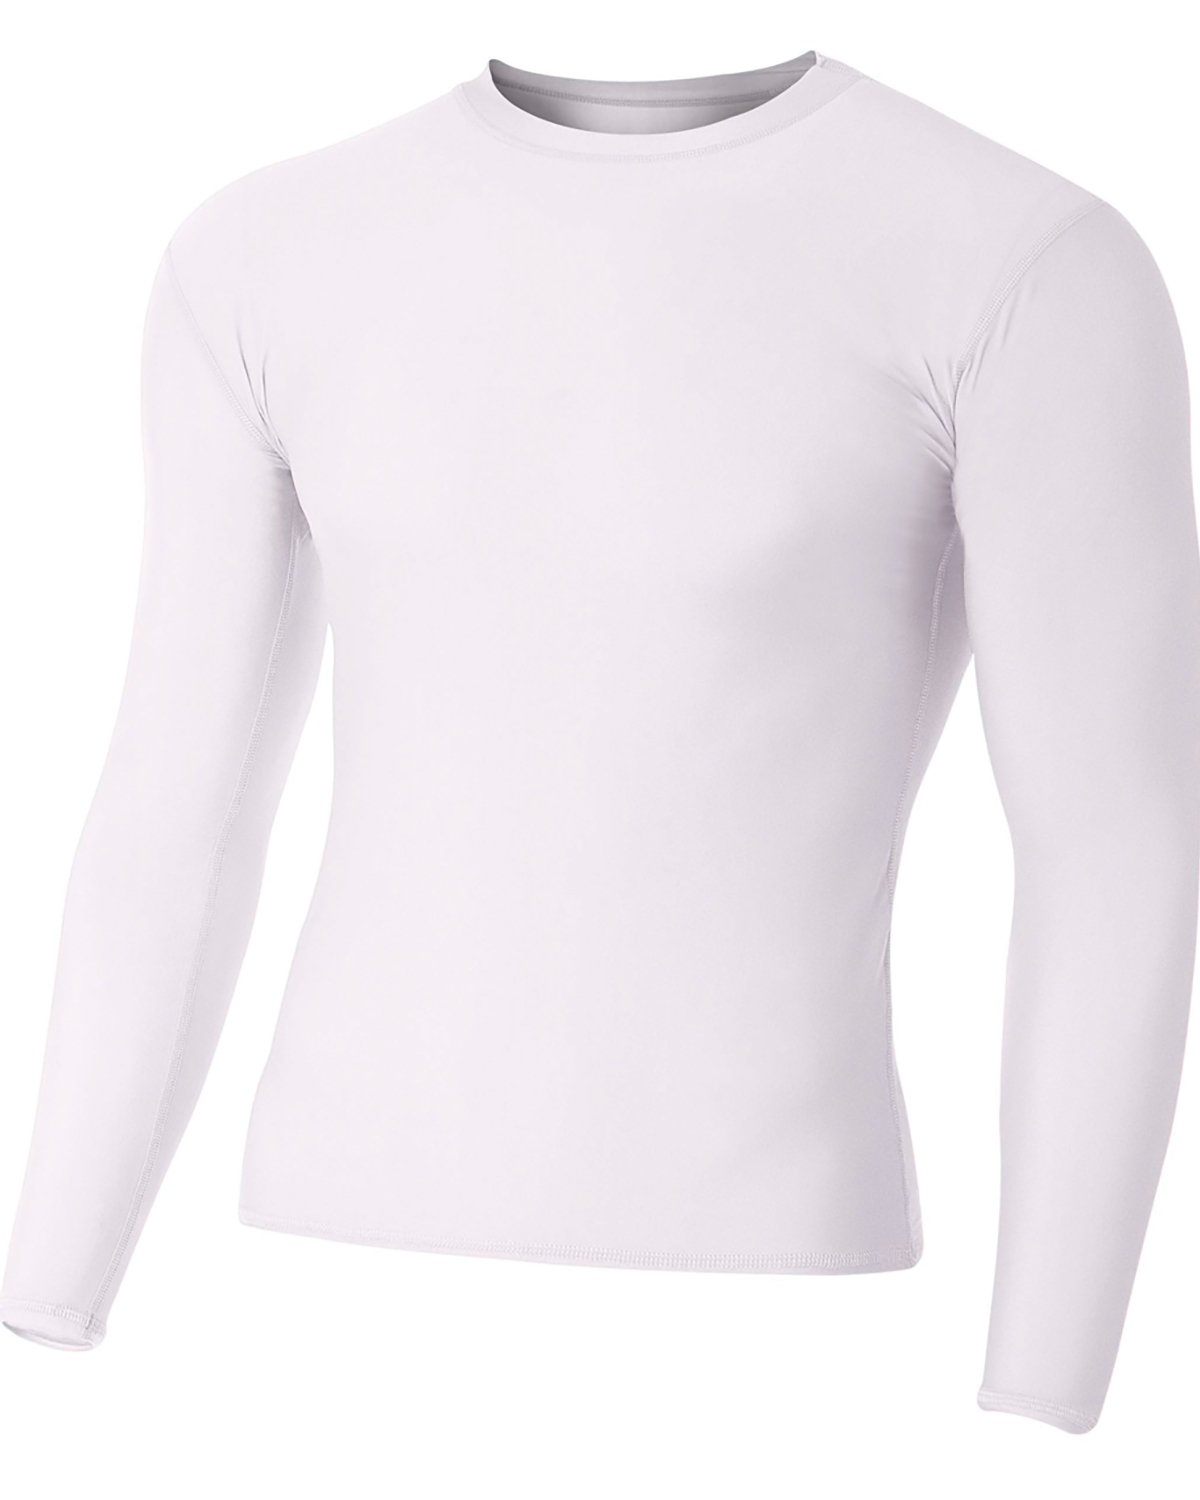 Adult Polyester Spandex Long Sleeve Compression T-Shirt-